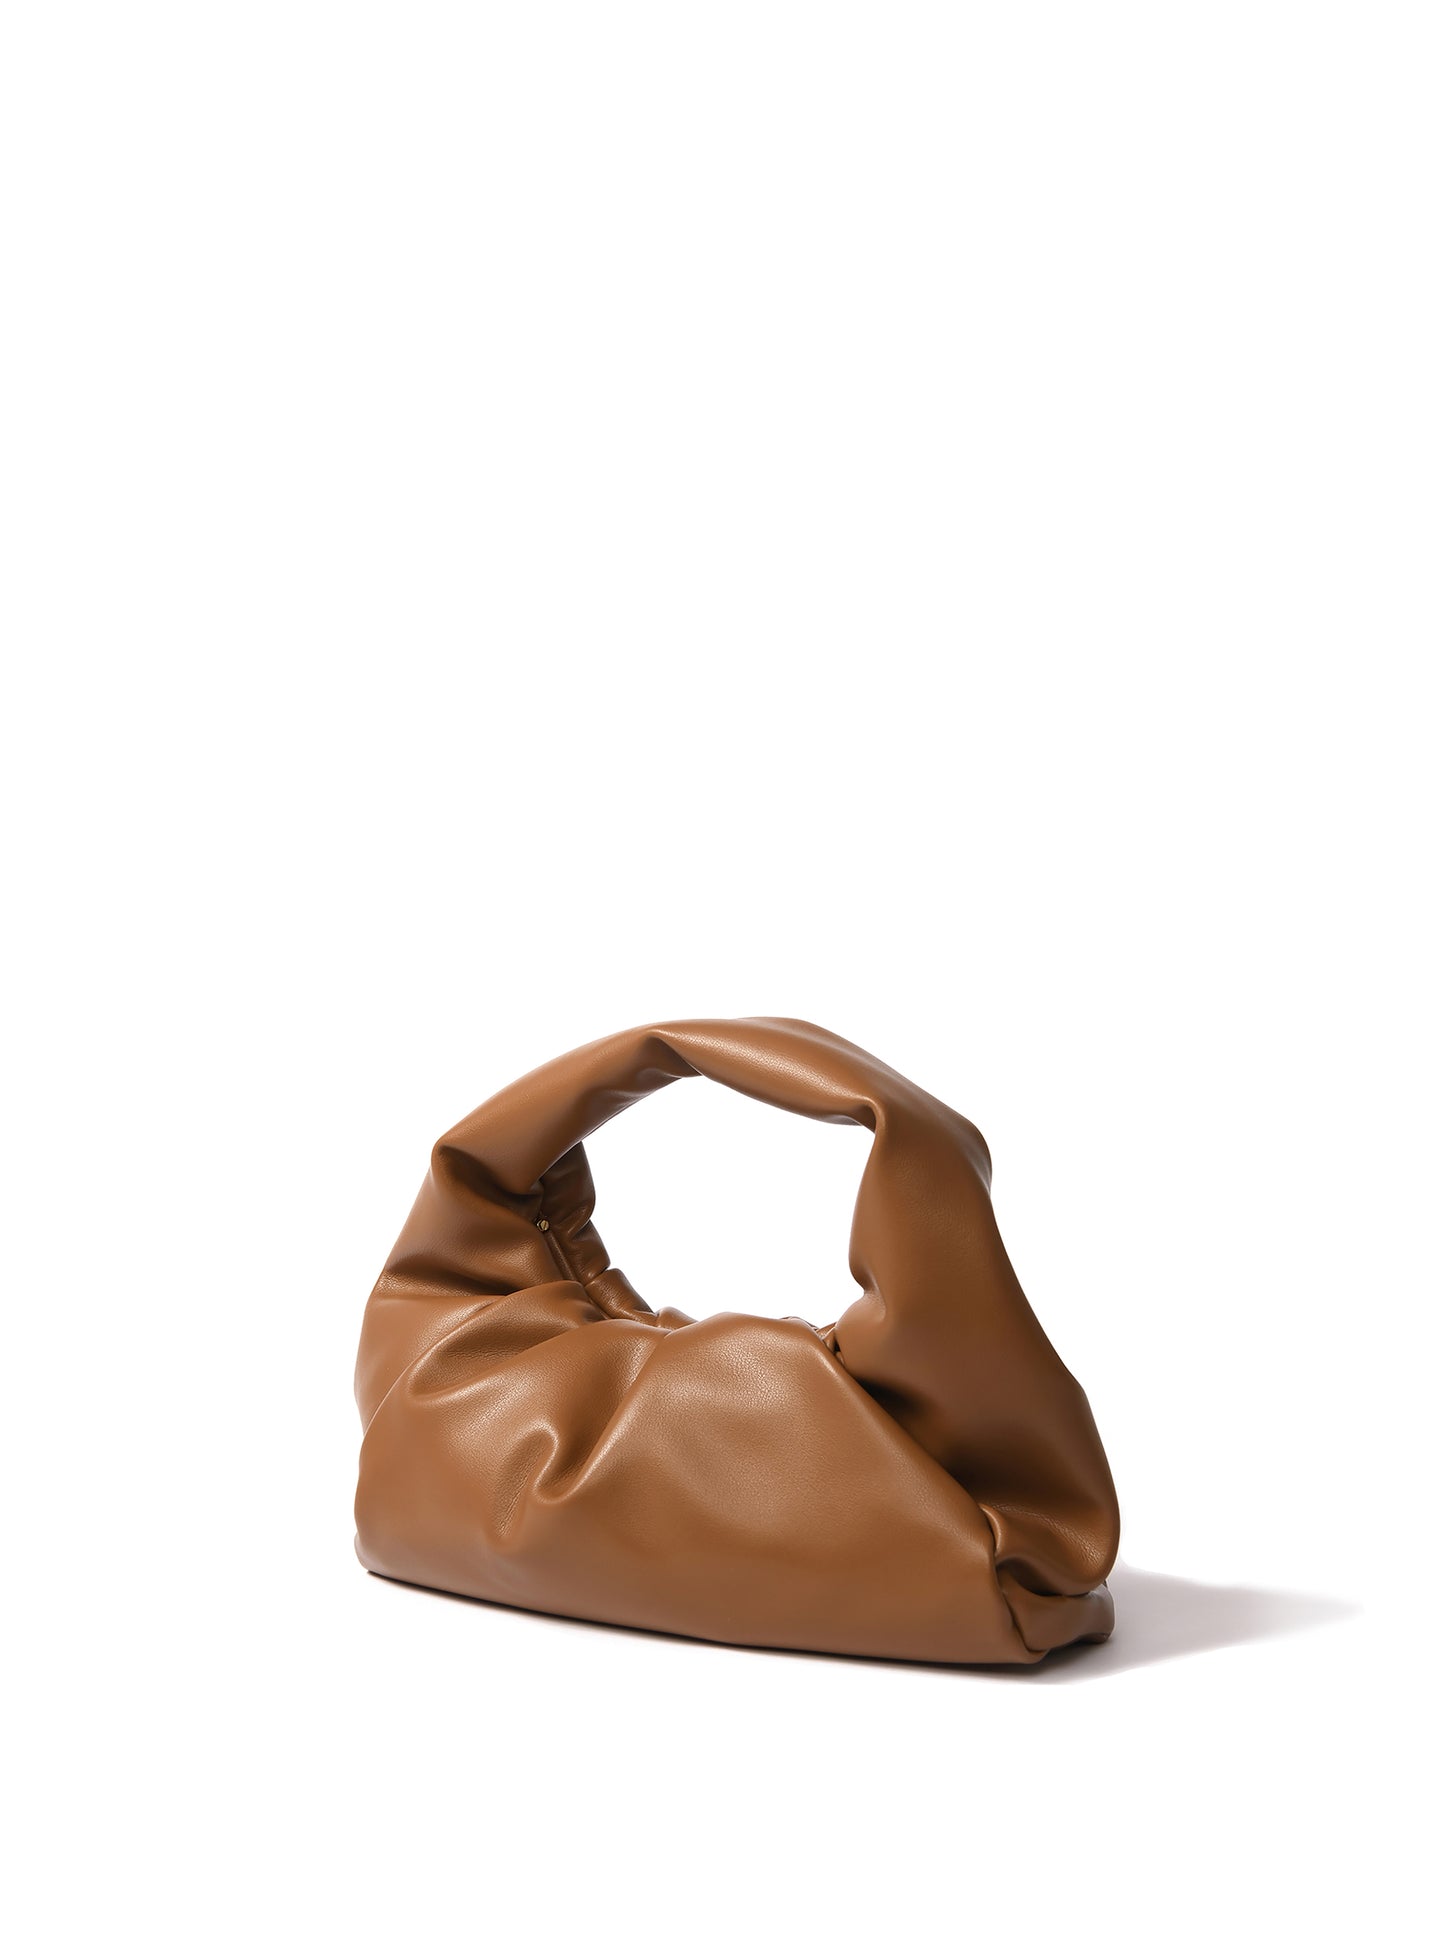 Marshmallow Croissant Bag in Soft Leather, Caramel